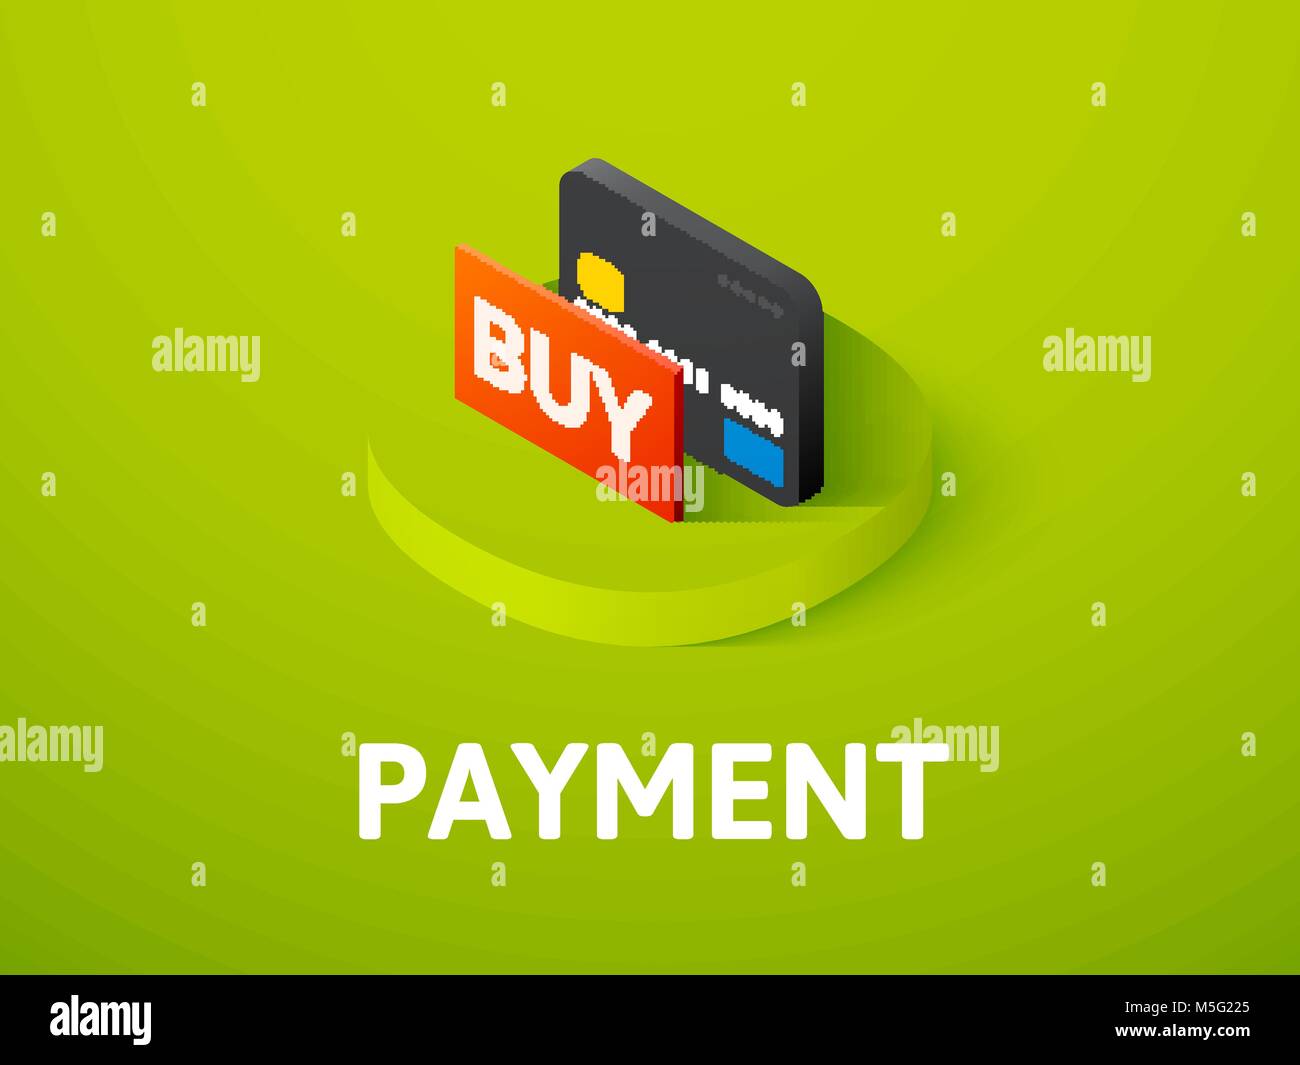 Payment isometric icon, isolated on color background Stock Vector